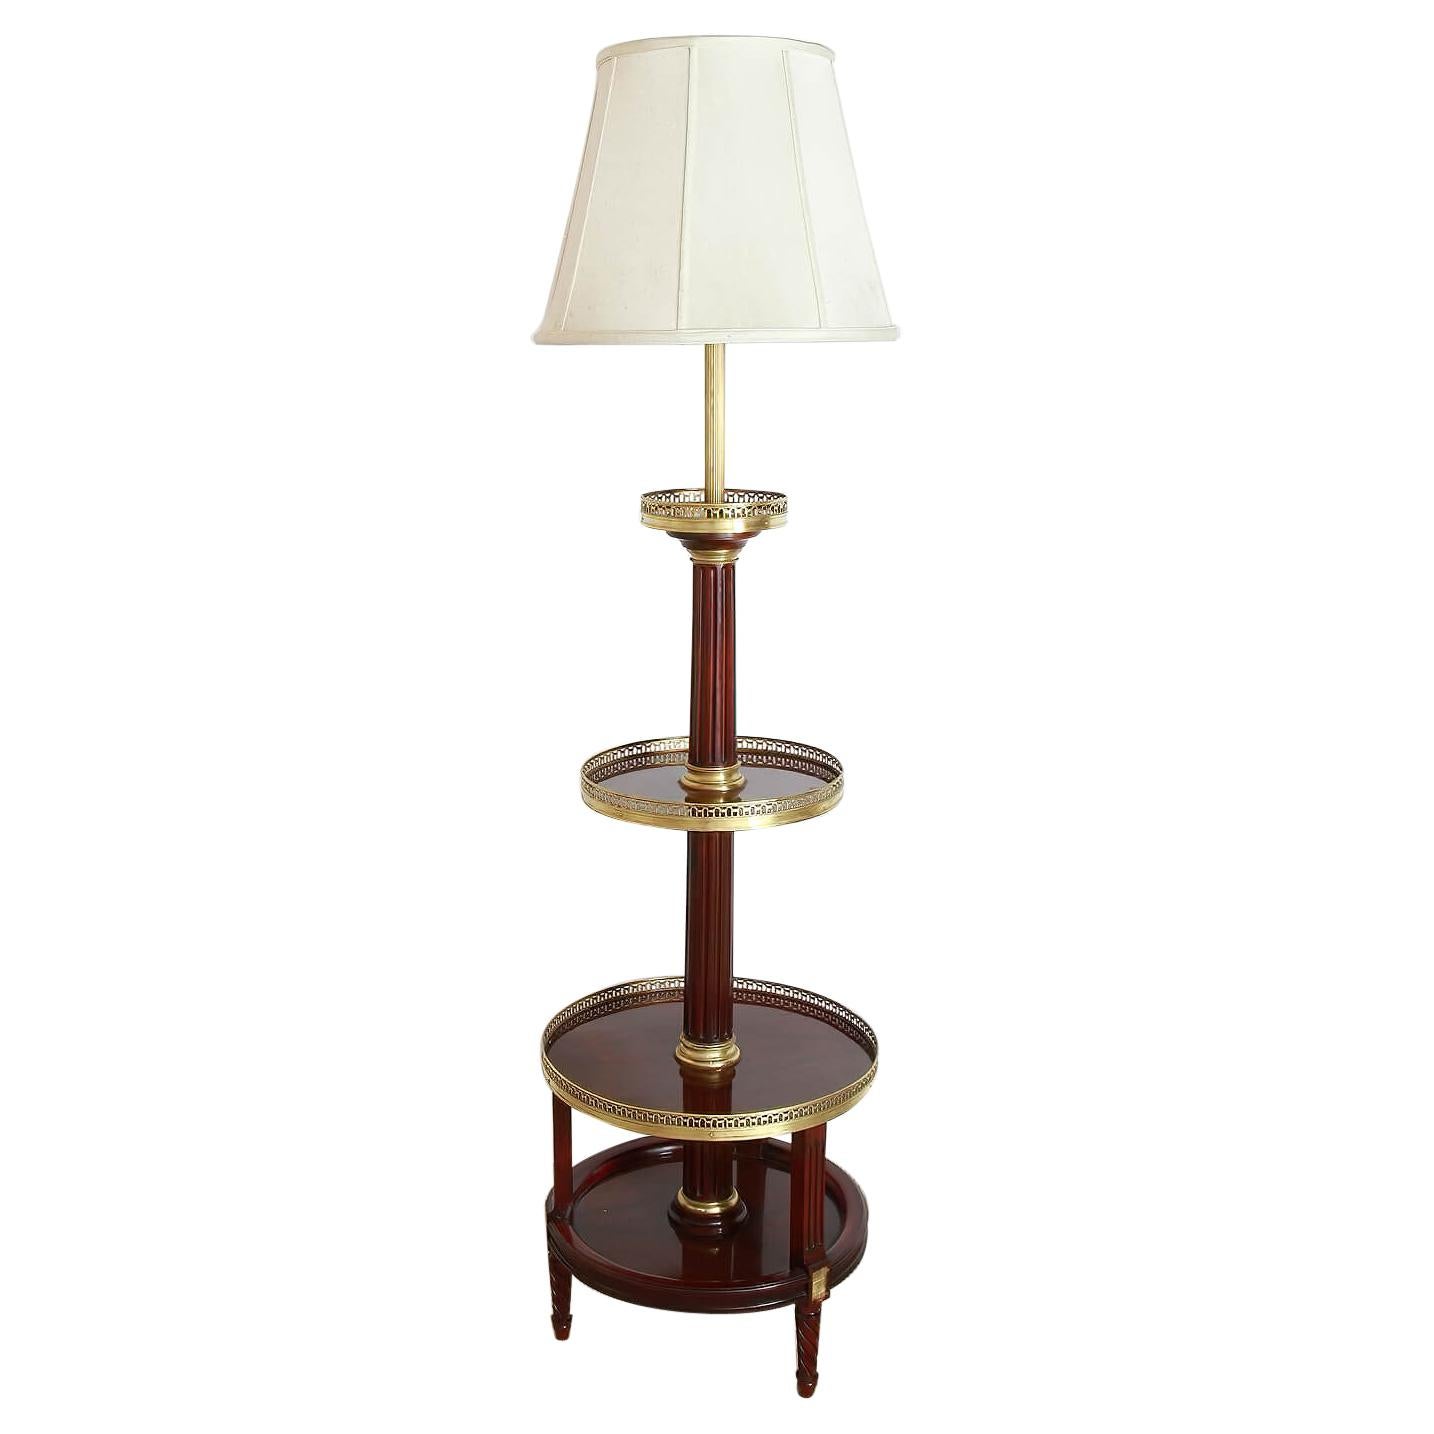 French Louis XVI Style Floor Lamp For Sale